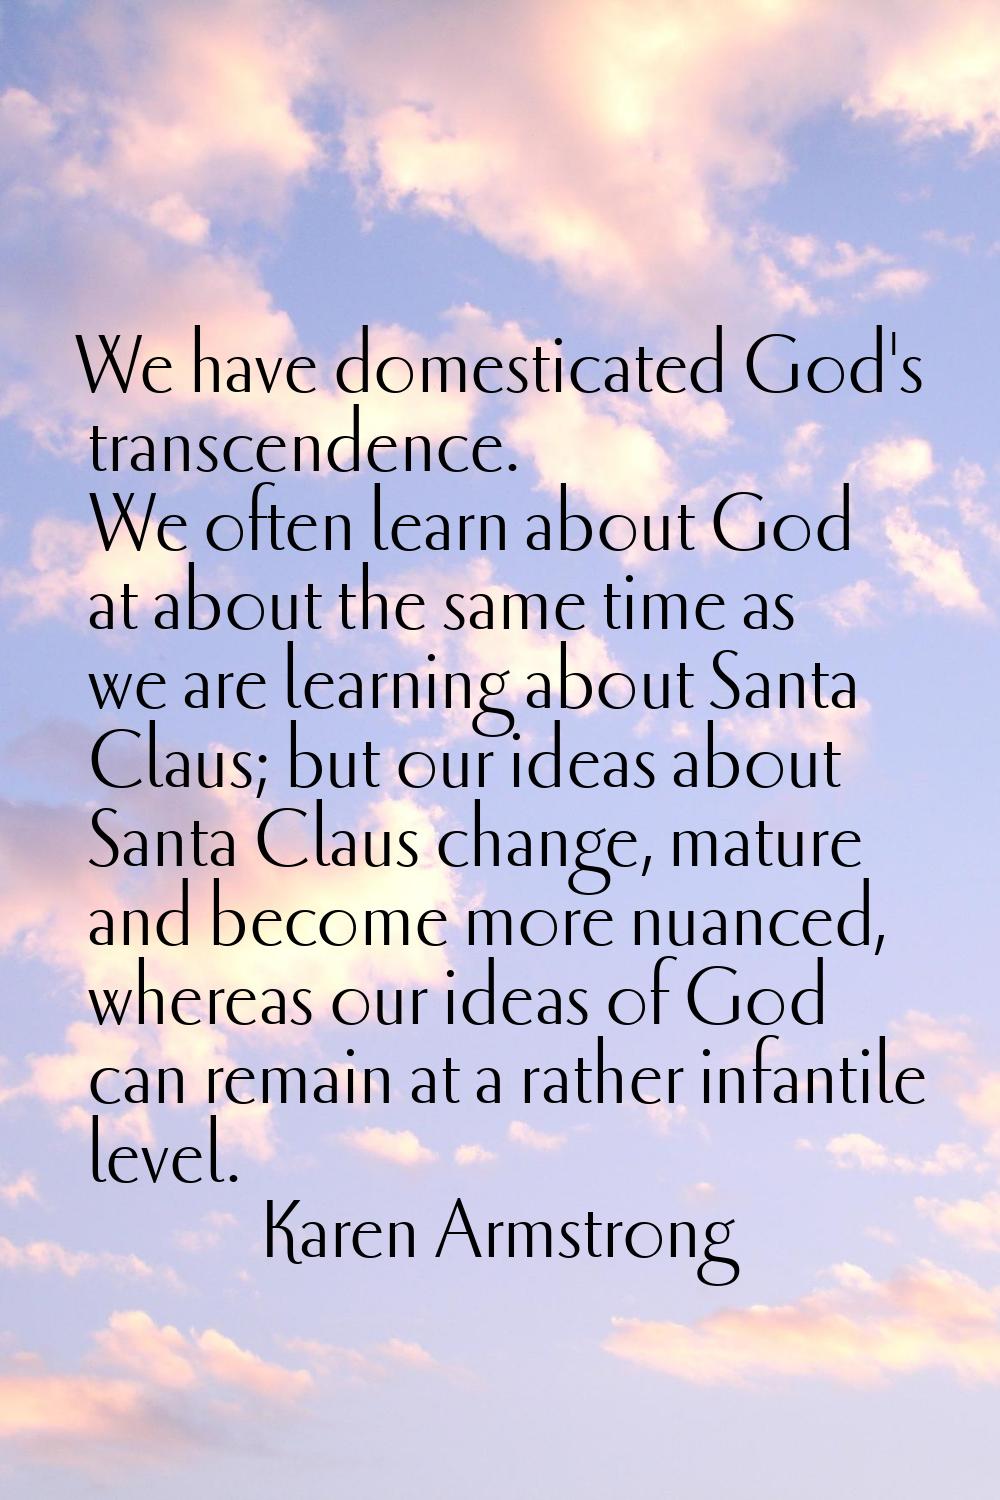 We have domesticated God's transcendence. We often learn about God at about the same time as we are